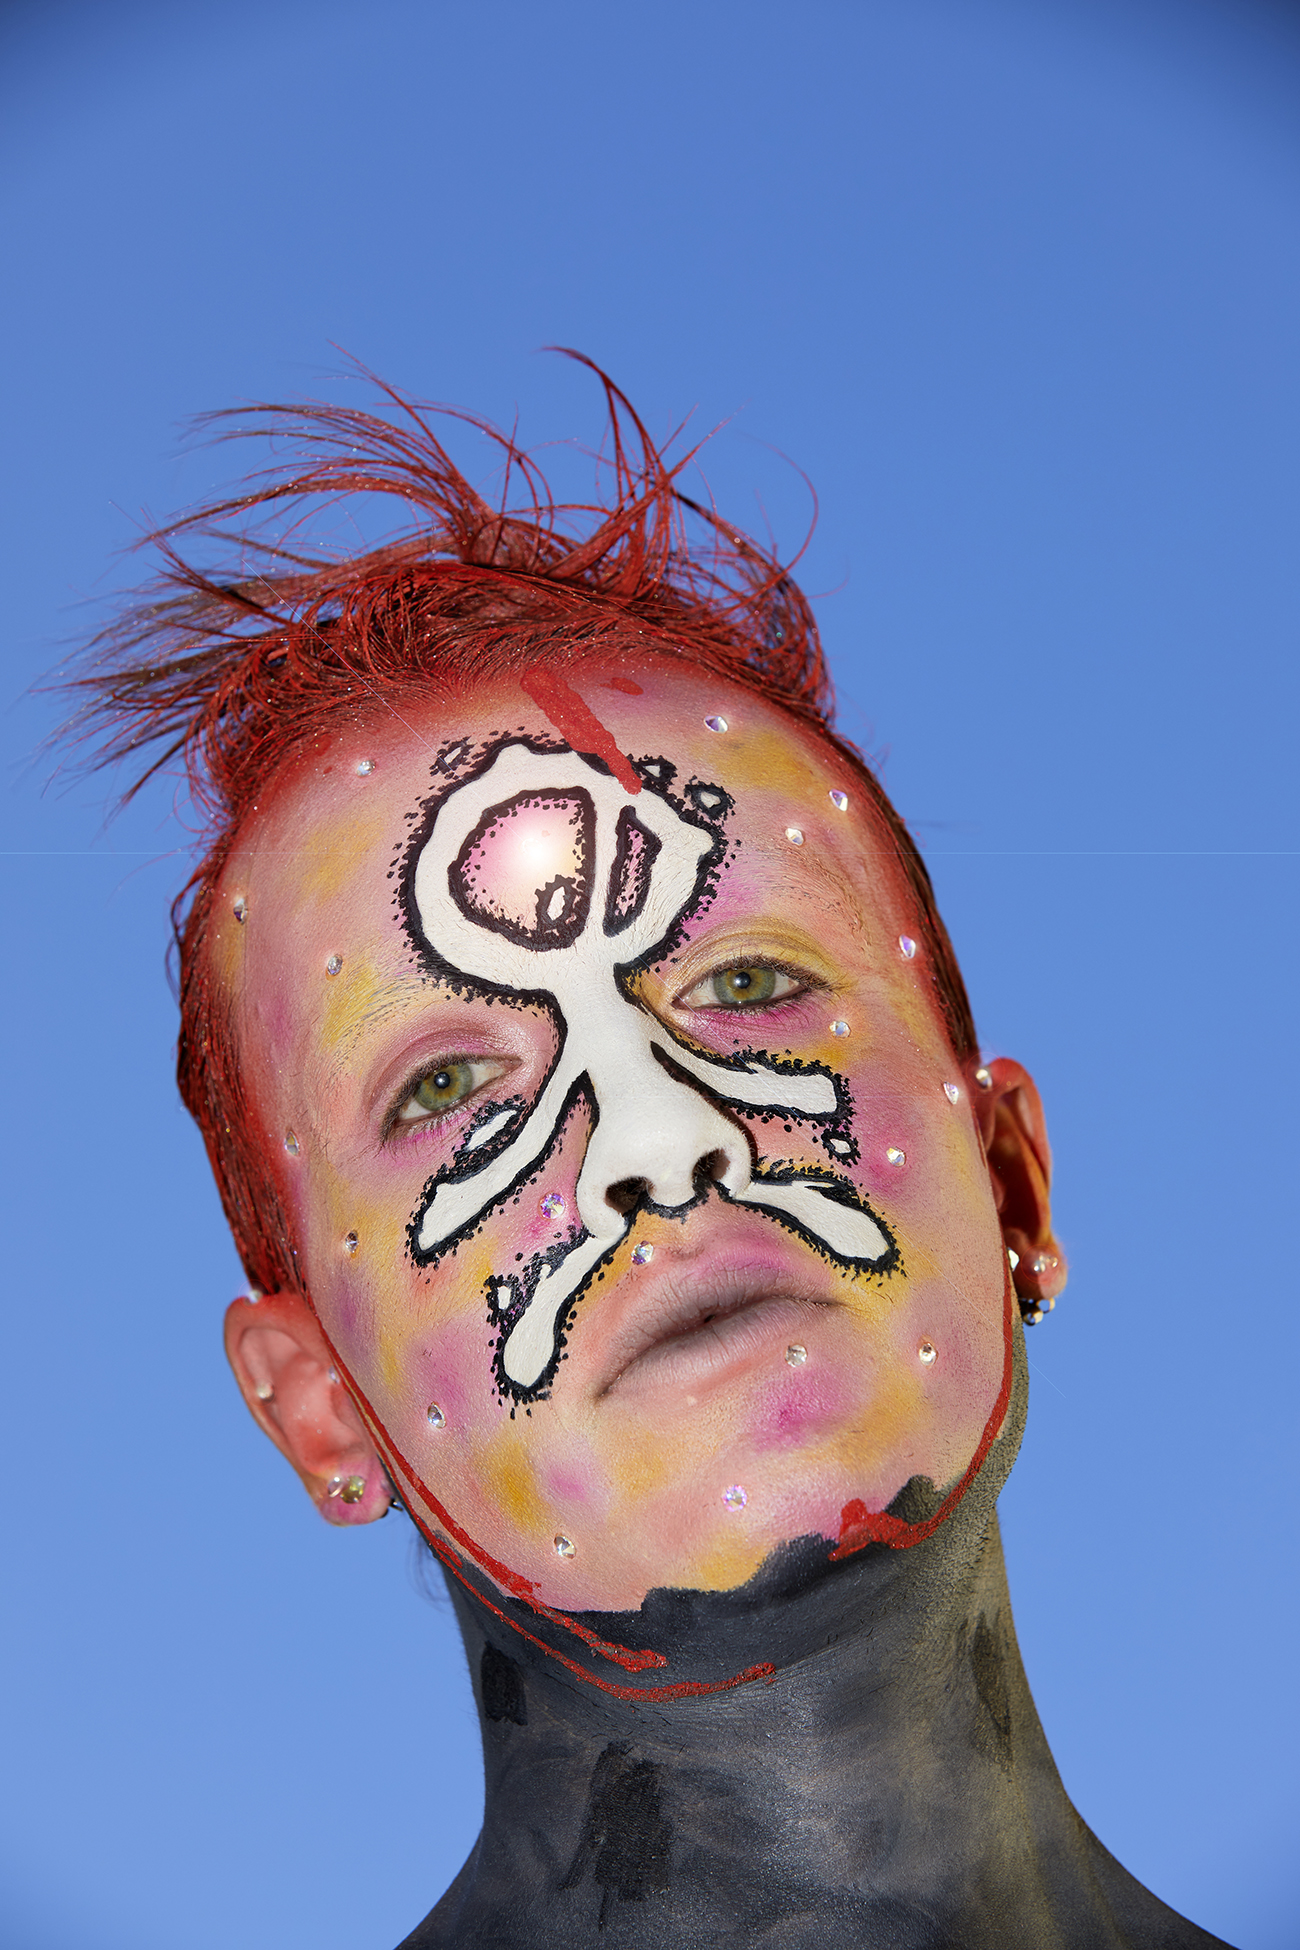 Portrait of Jesse in graphic red, white and black facepaint against a sky background